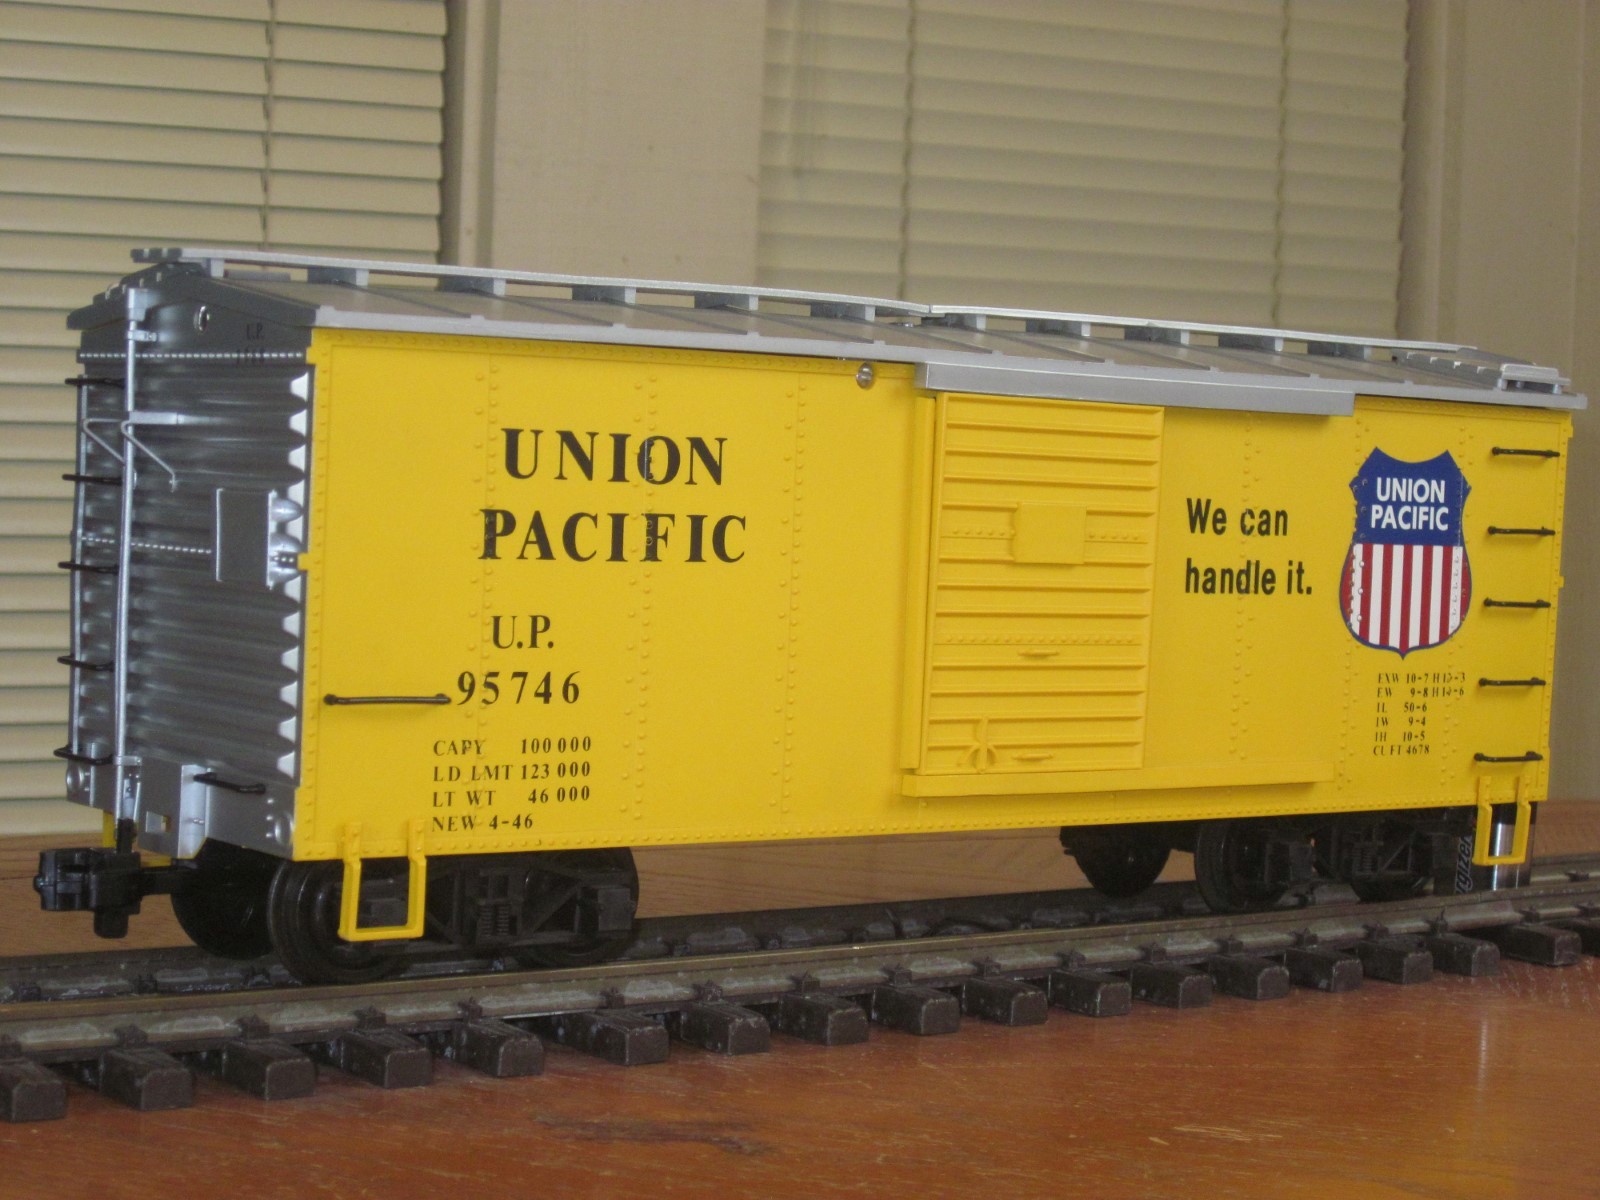 R1968 Union Pacific UP 95746